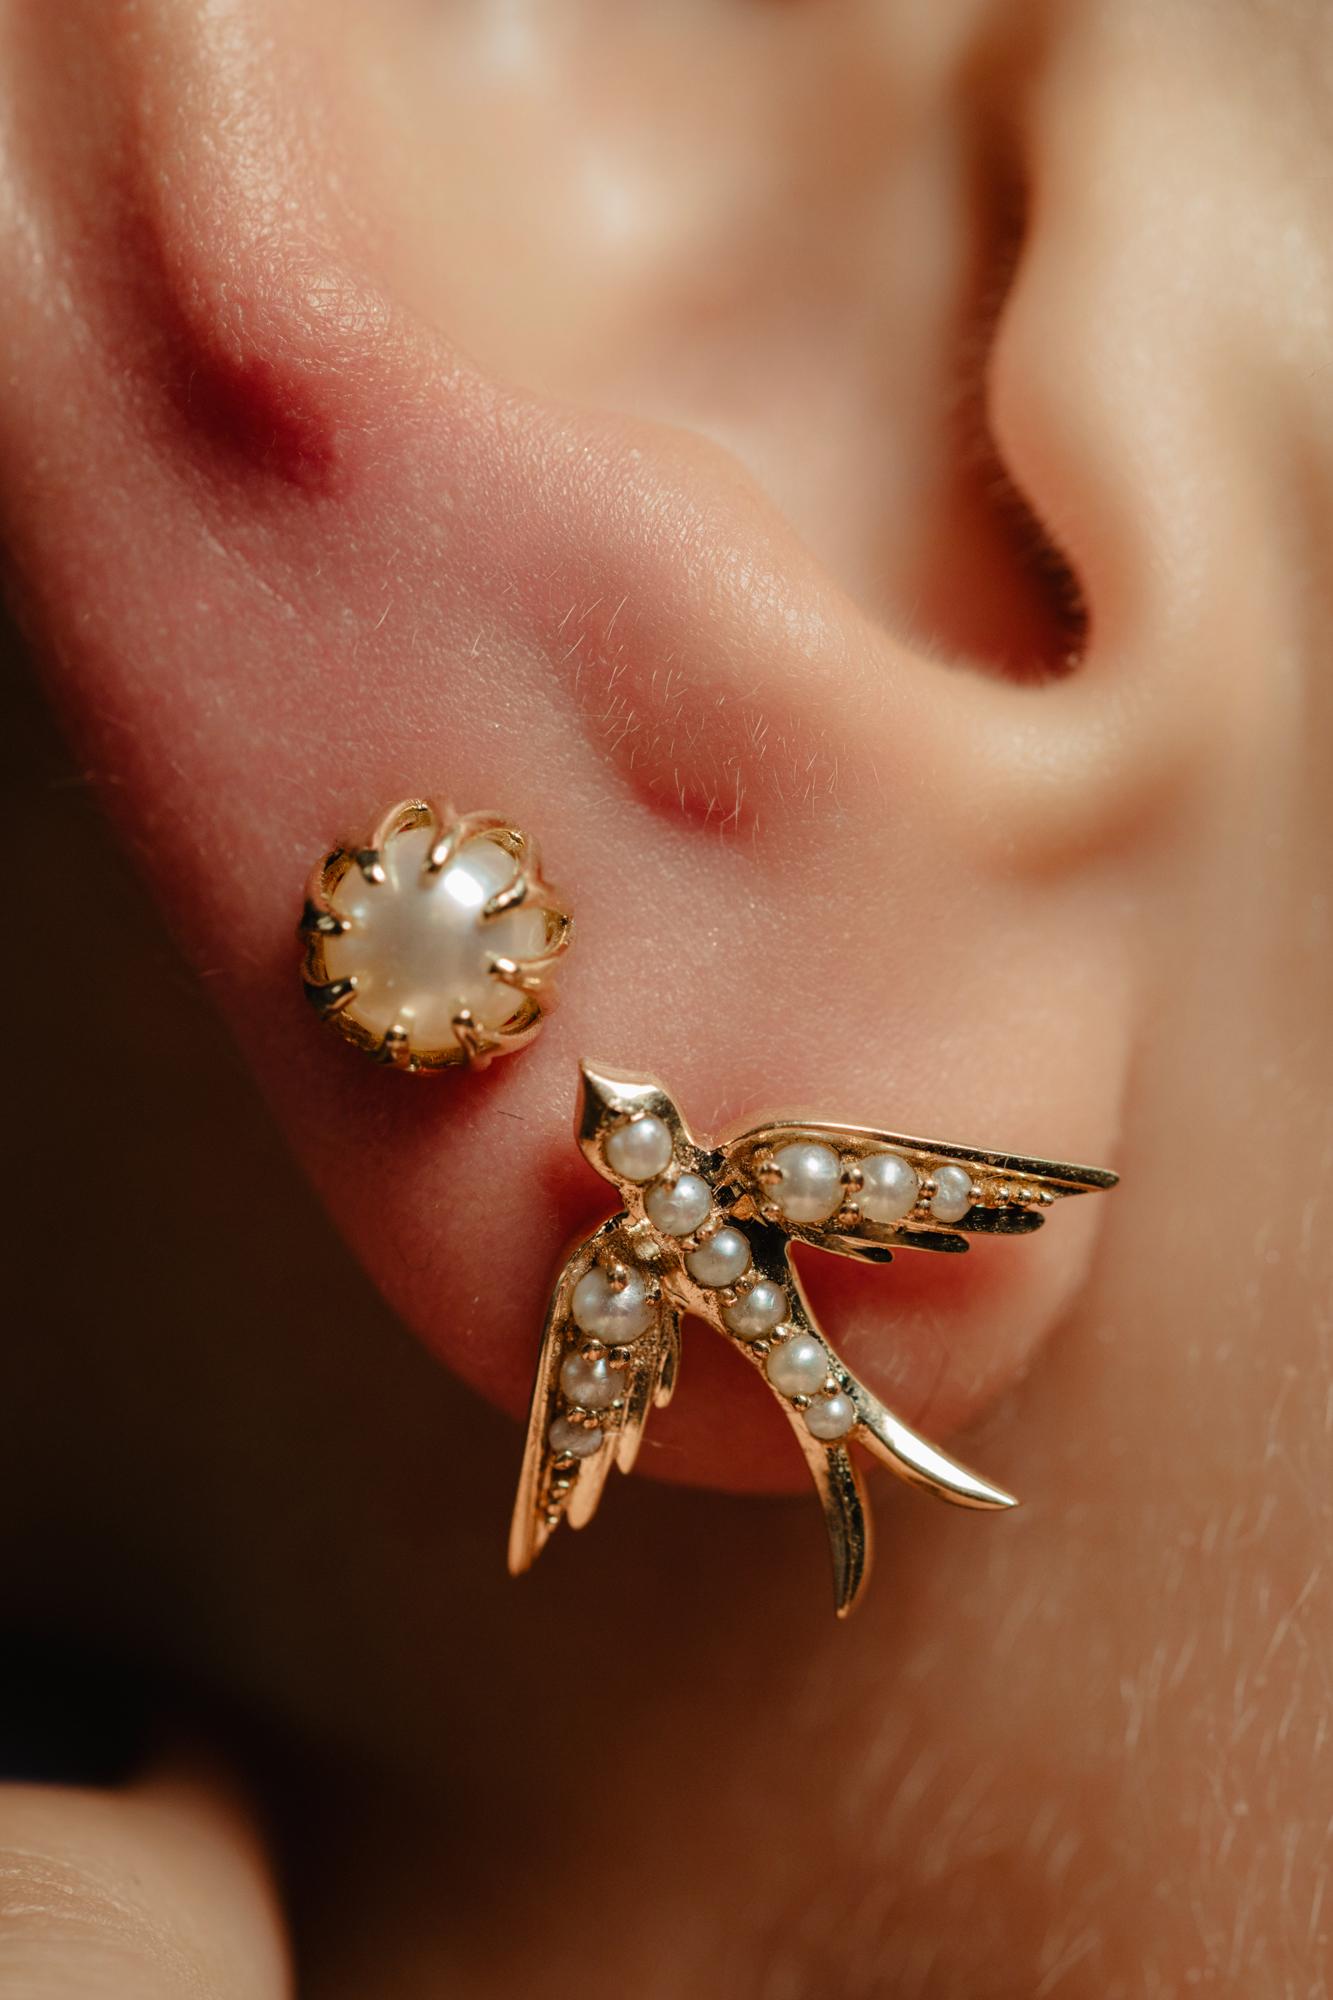 A perfect love token piece of jewelry! Romantic and very symbolic this antique revival stud is handmade by our goldsmiths. Made of solid 14k yellow gold, these beautiful Victorian style swallow earring is set with natural pearls.

The design of this